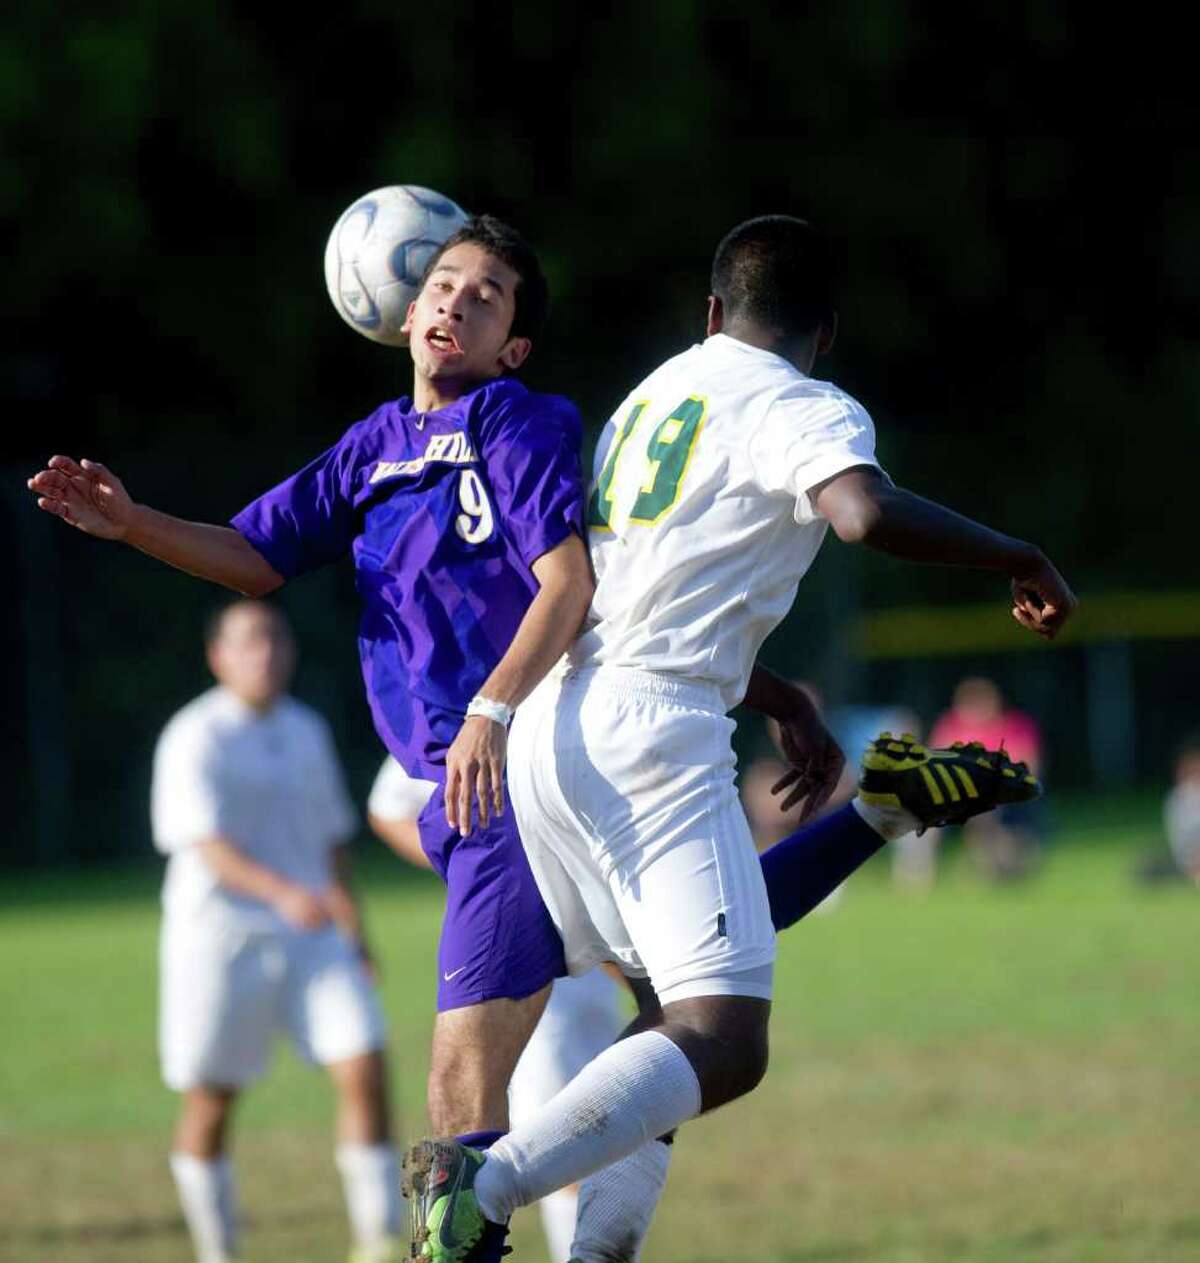 Westhill's Christian Esquivel and Trinity Catholic's Andre Gittens collide as Trinity Catholic hosts Westhill High School in a boys soccer game Monday, October 11, 2010.